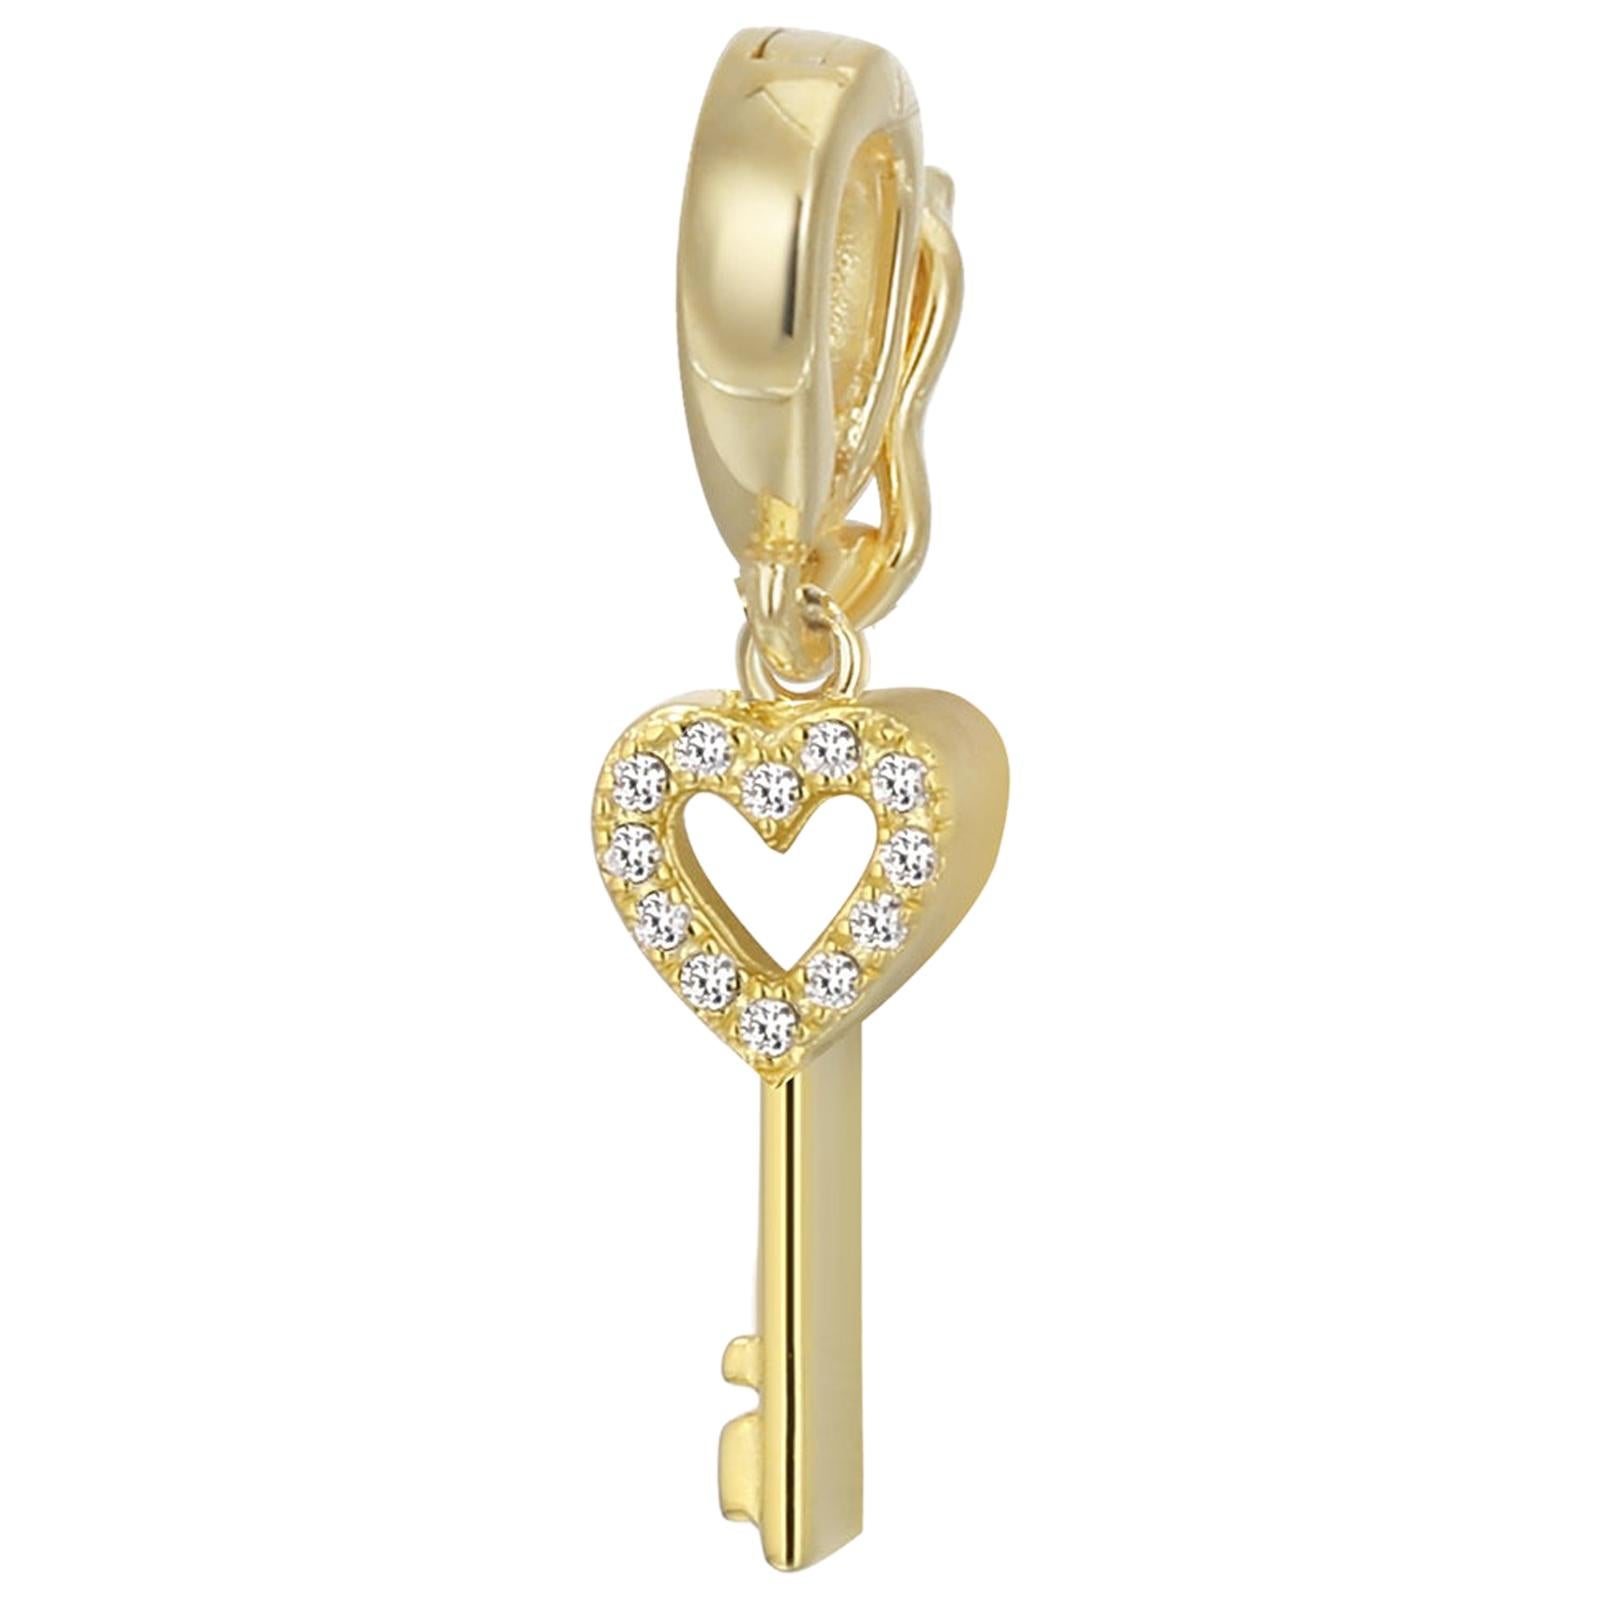 Heart Key Pave Pendant or Charm